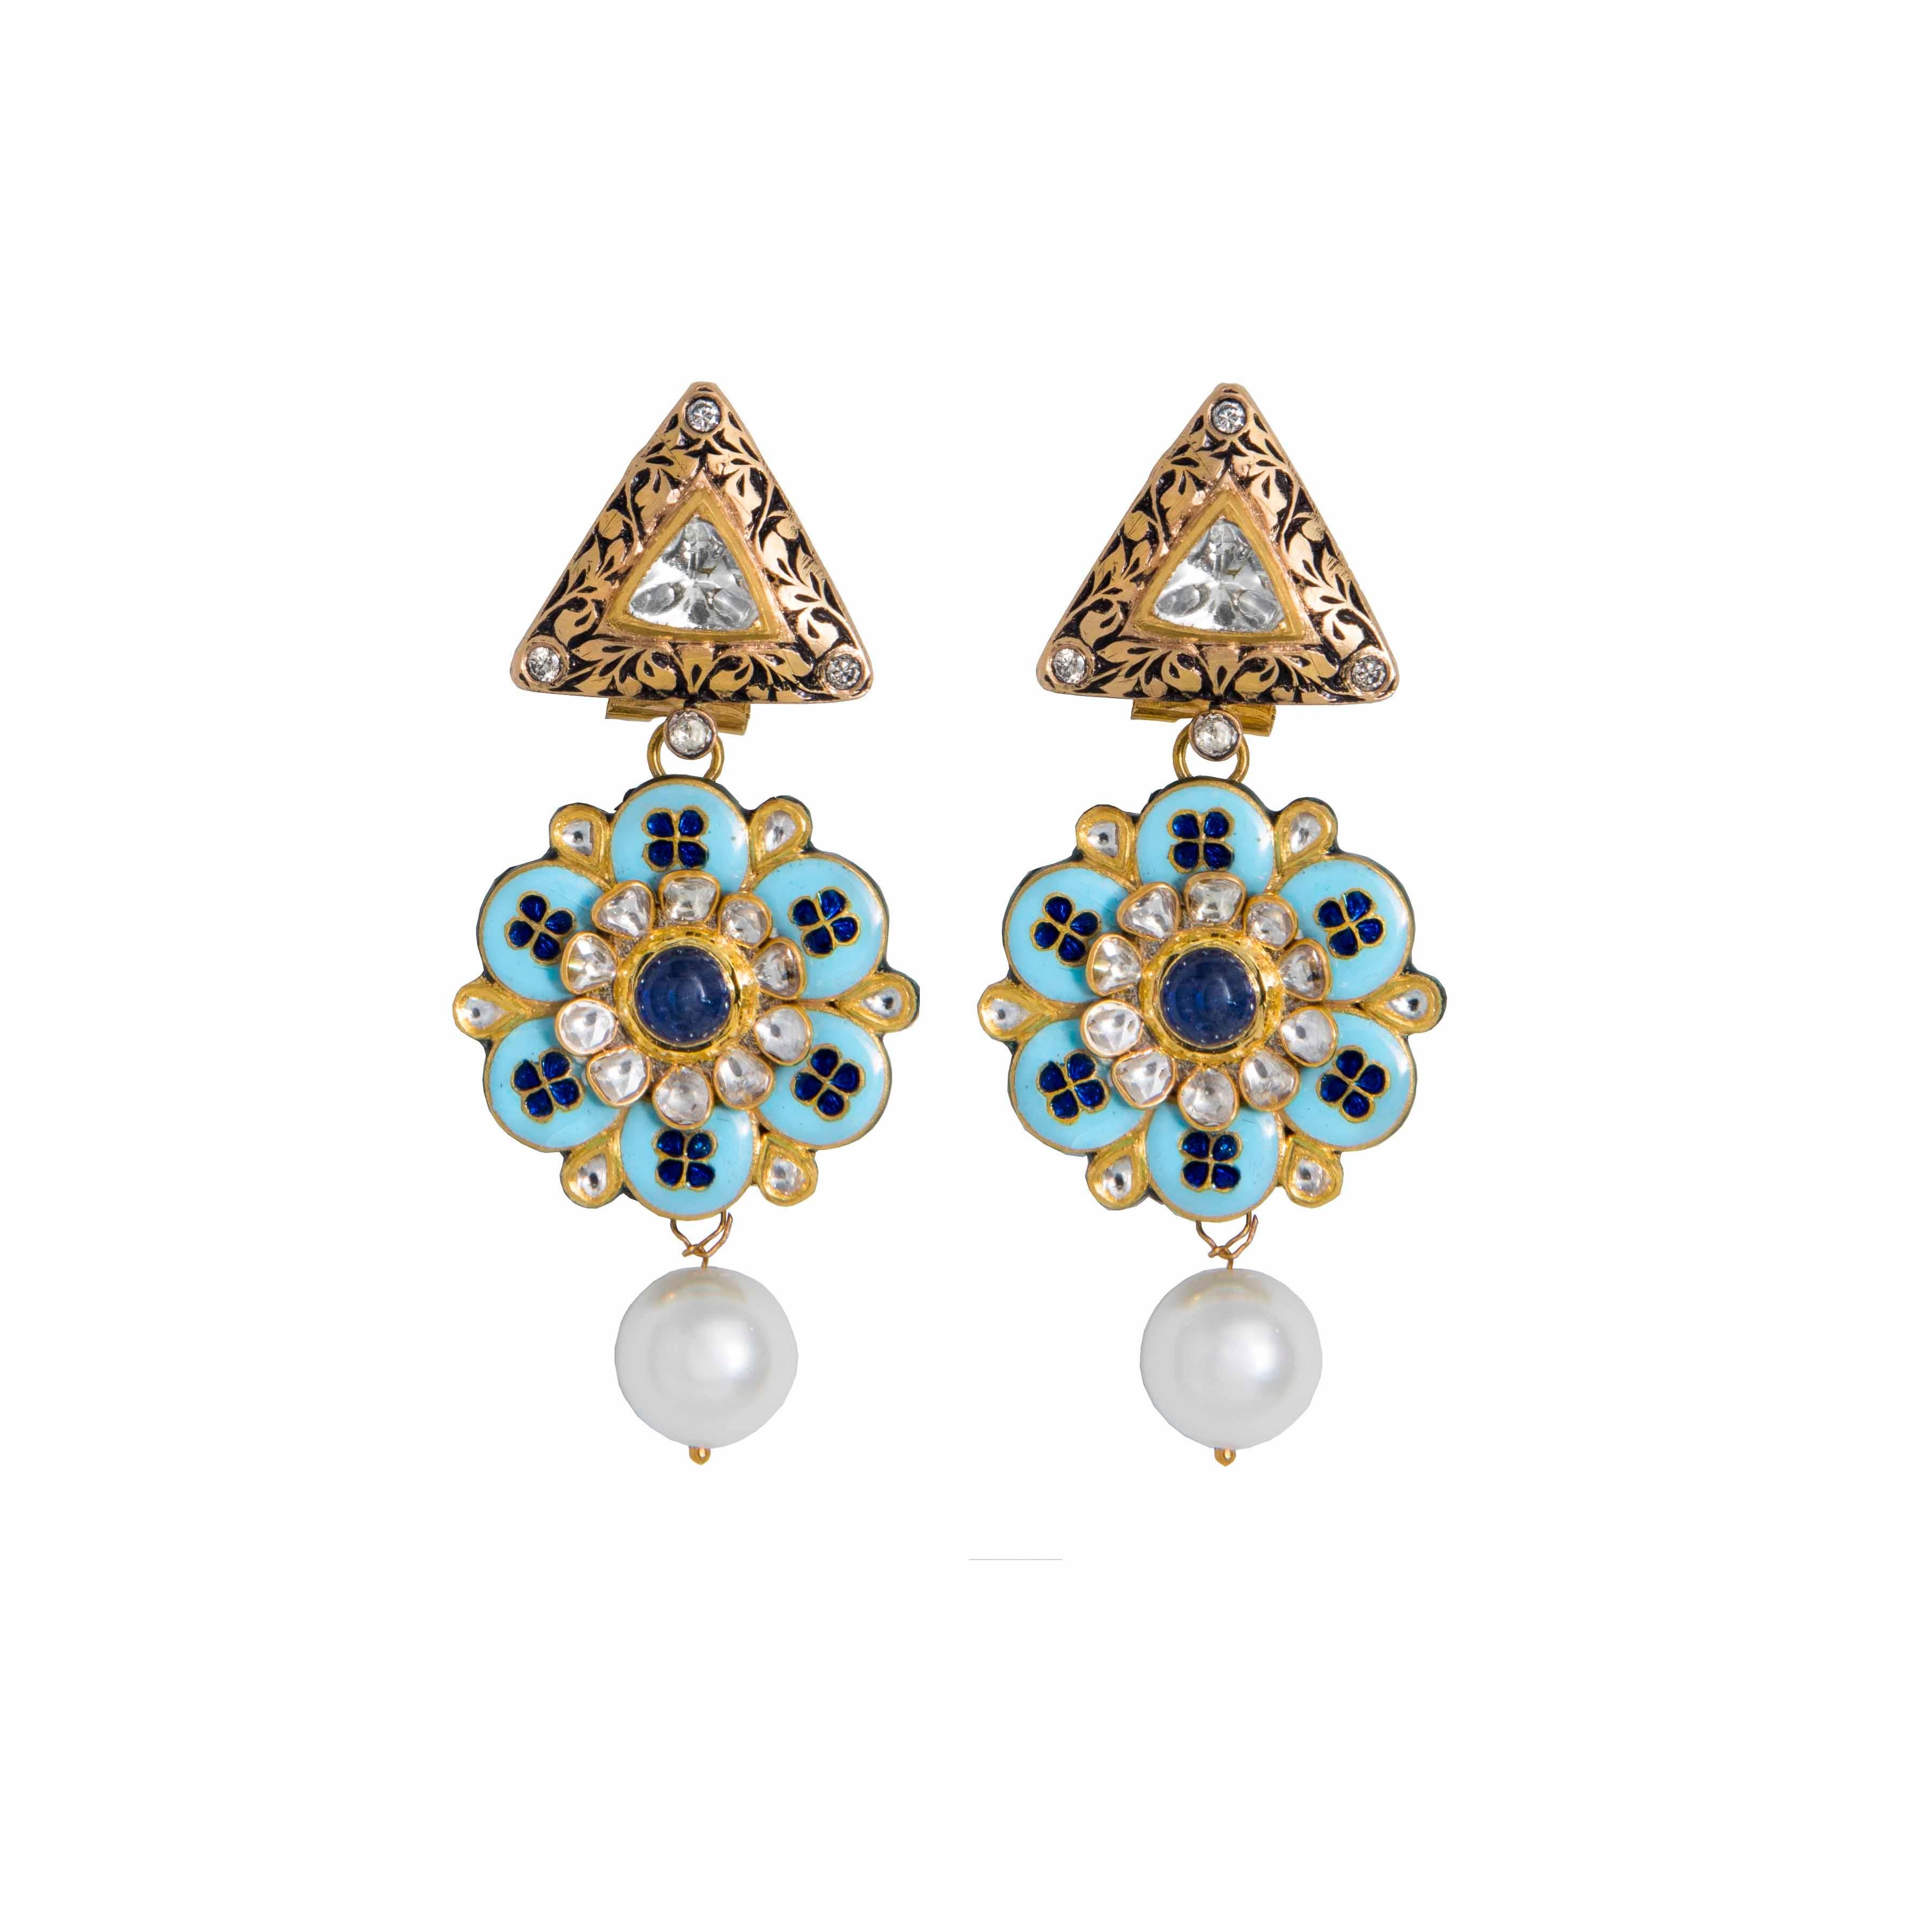 Earring bottoms comprise blue Tanzanite with syndicate polkis (uncut diamonds) inside and around the flower, with turquoise, blue and gold enamel. The tops feature Zimbabwean polkis (uncut diamonds) in the centre, double cut diamonds at the sides,